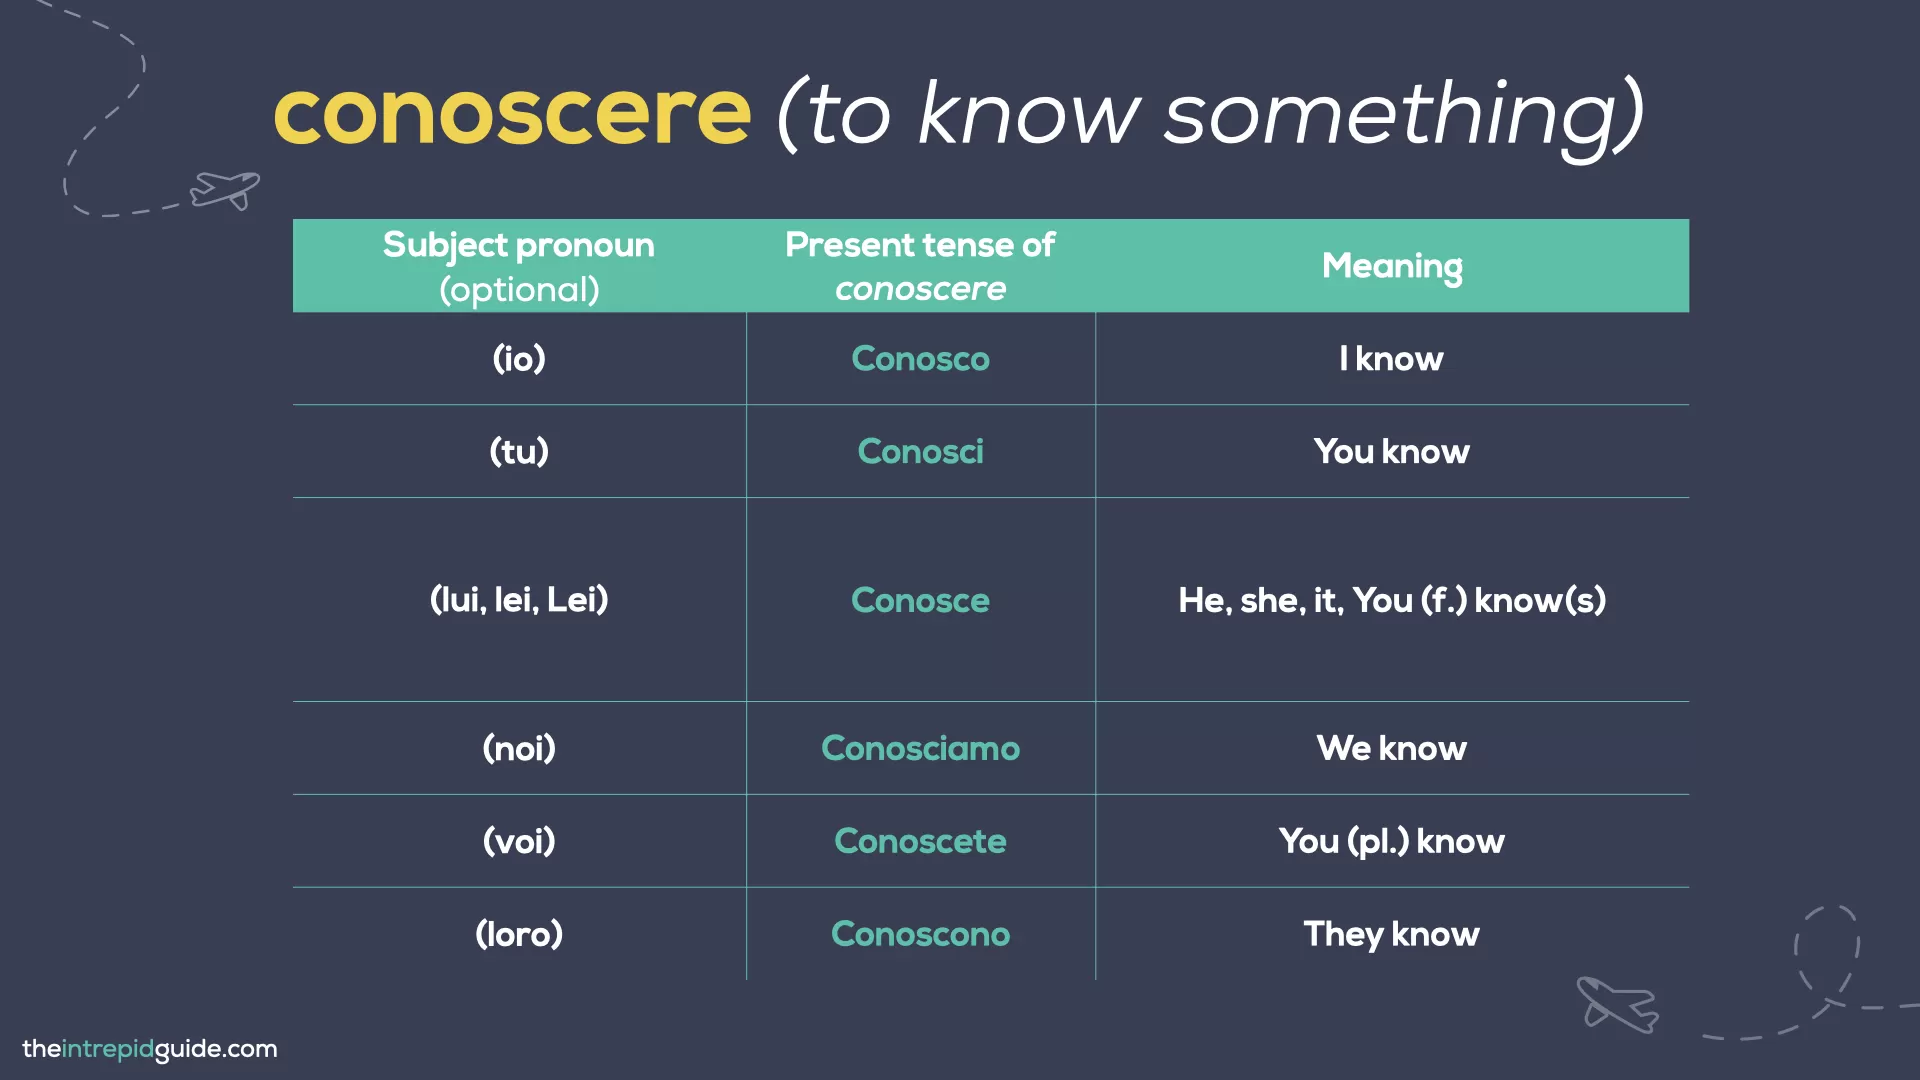 What is the difference between SAPERE and CONOSCERE - How to conjugate the verb CONOSCERE